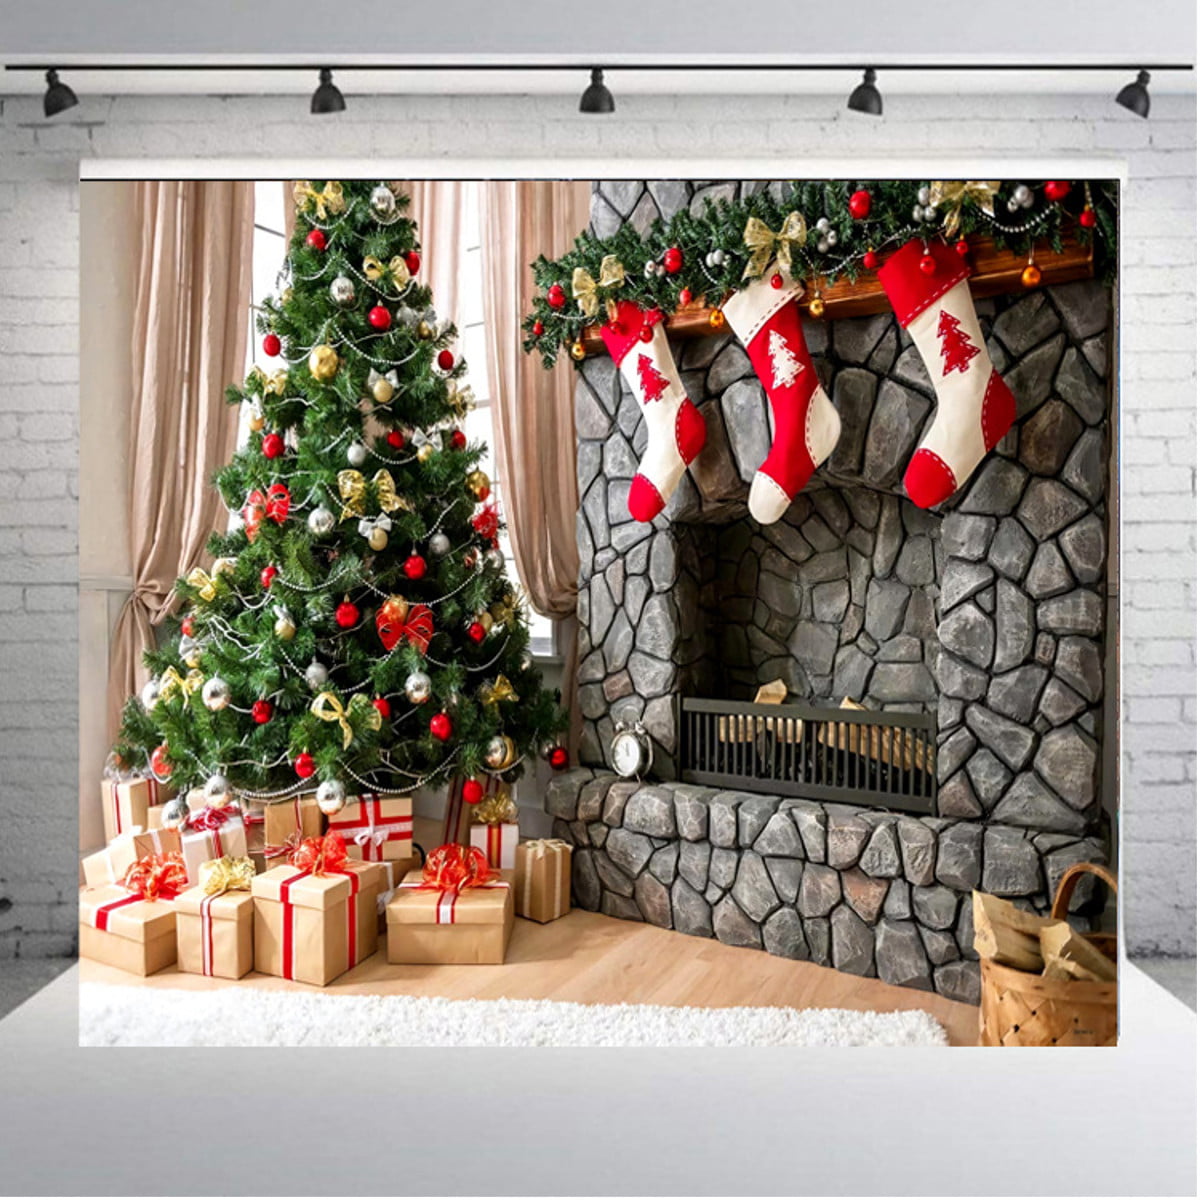 Laeacco 10x7ft Vinyl Photography Background Merry Christmas Backdrops Hanging Decorative Light Bulb Rustic Brick Wall Christmas Eve Party New Year Decoration Children Adults Family Photo Booth